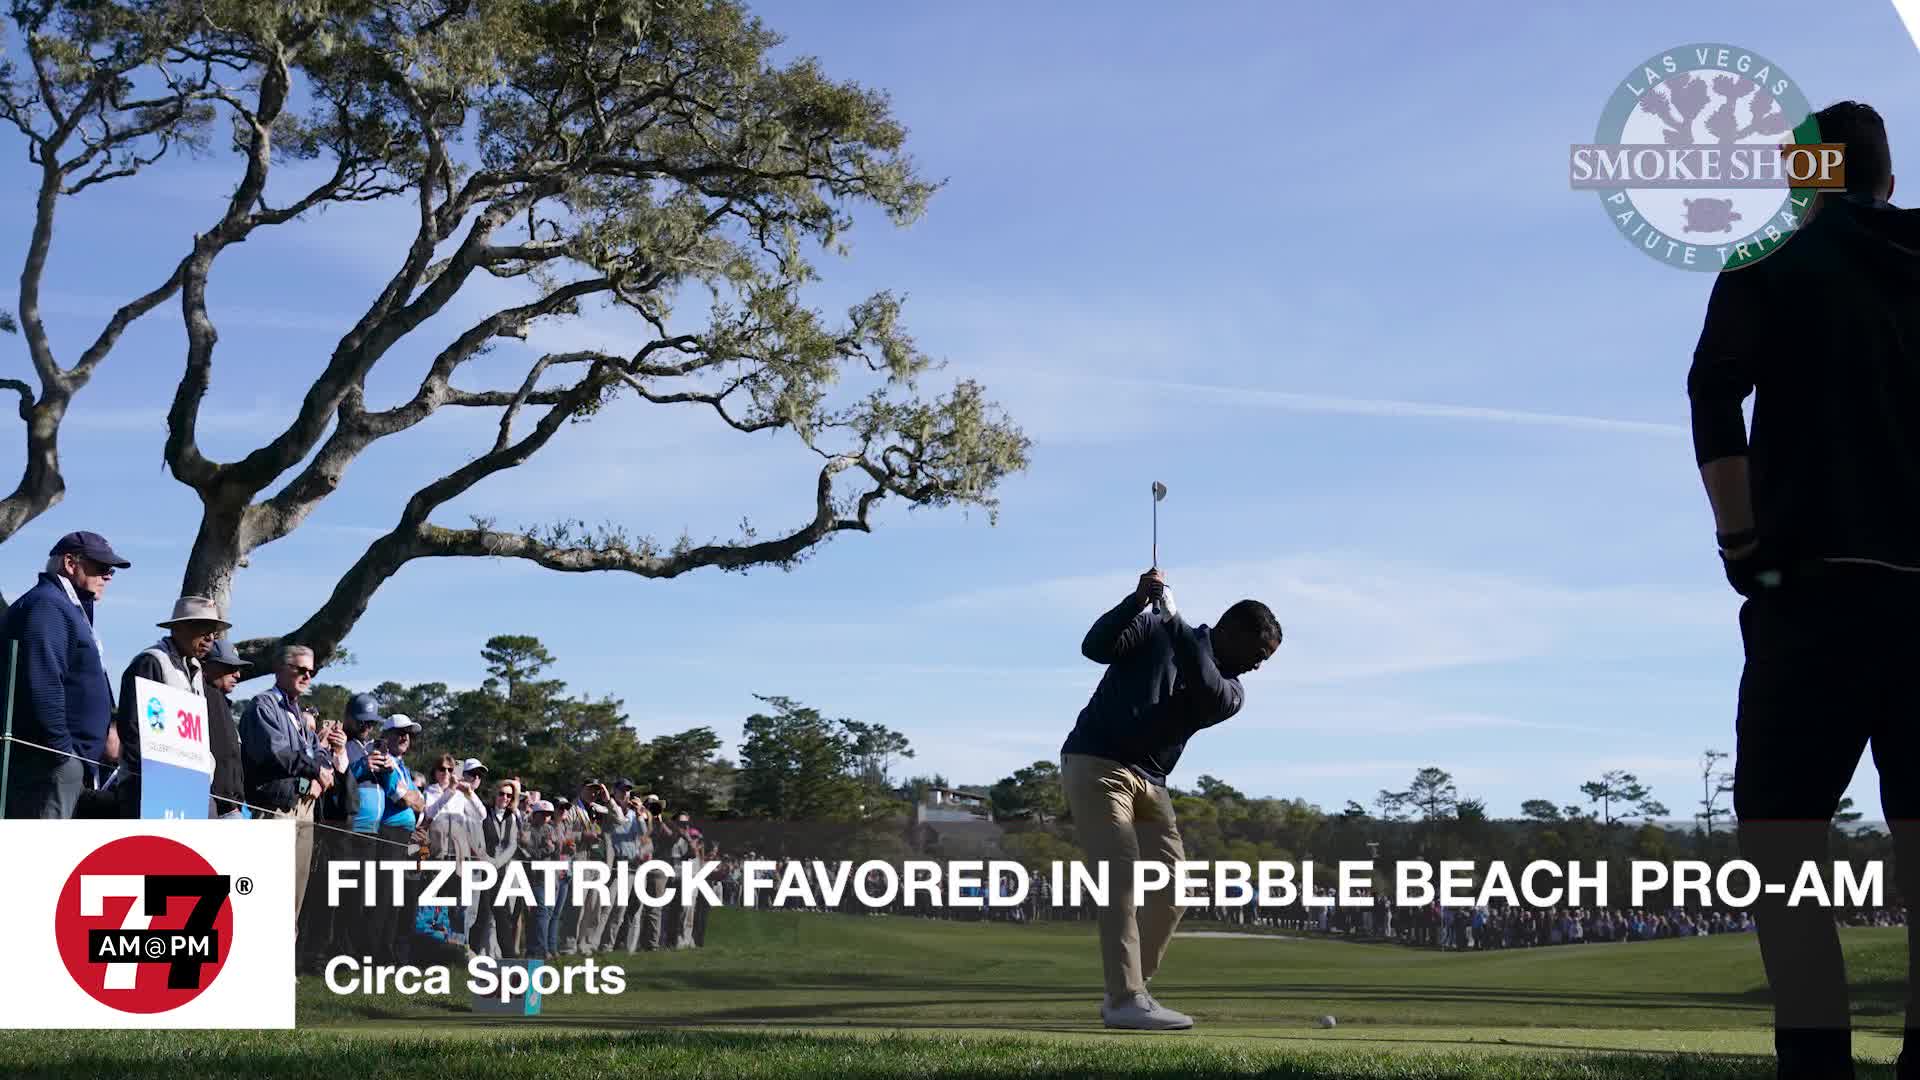 Fitzpatrick favored at AT&T Pebble Beach Pro-Am